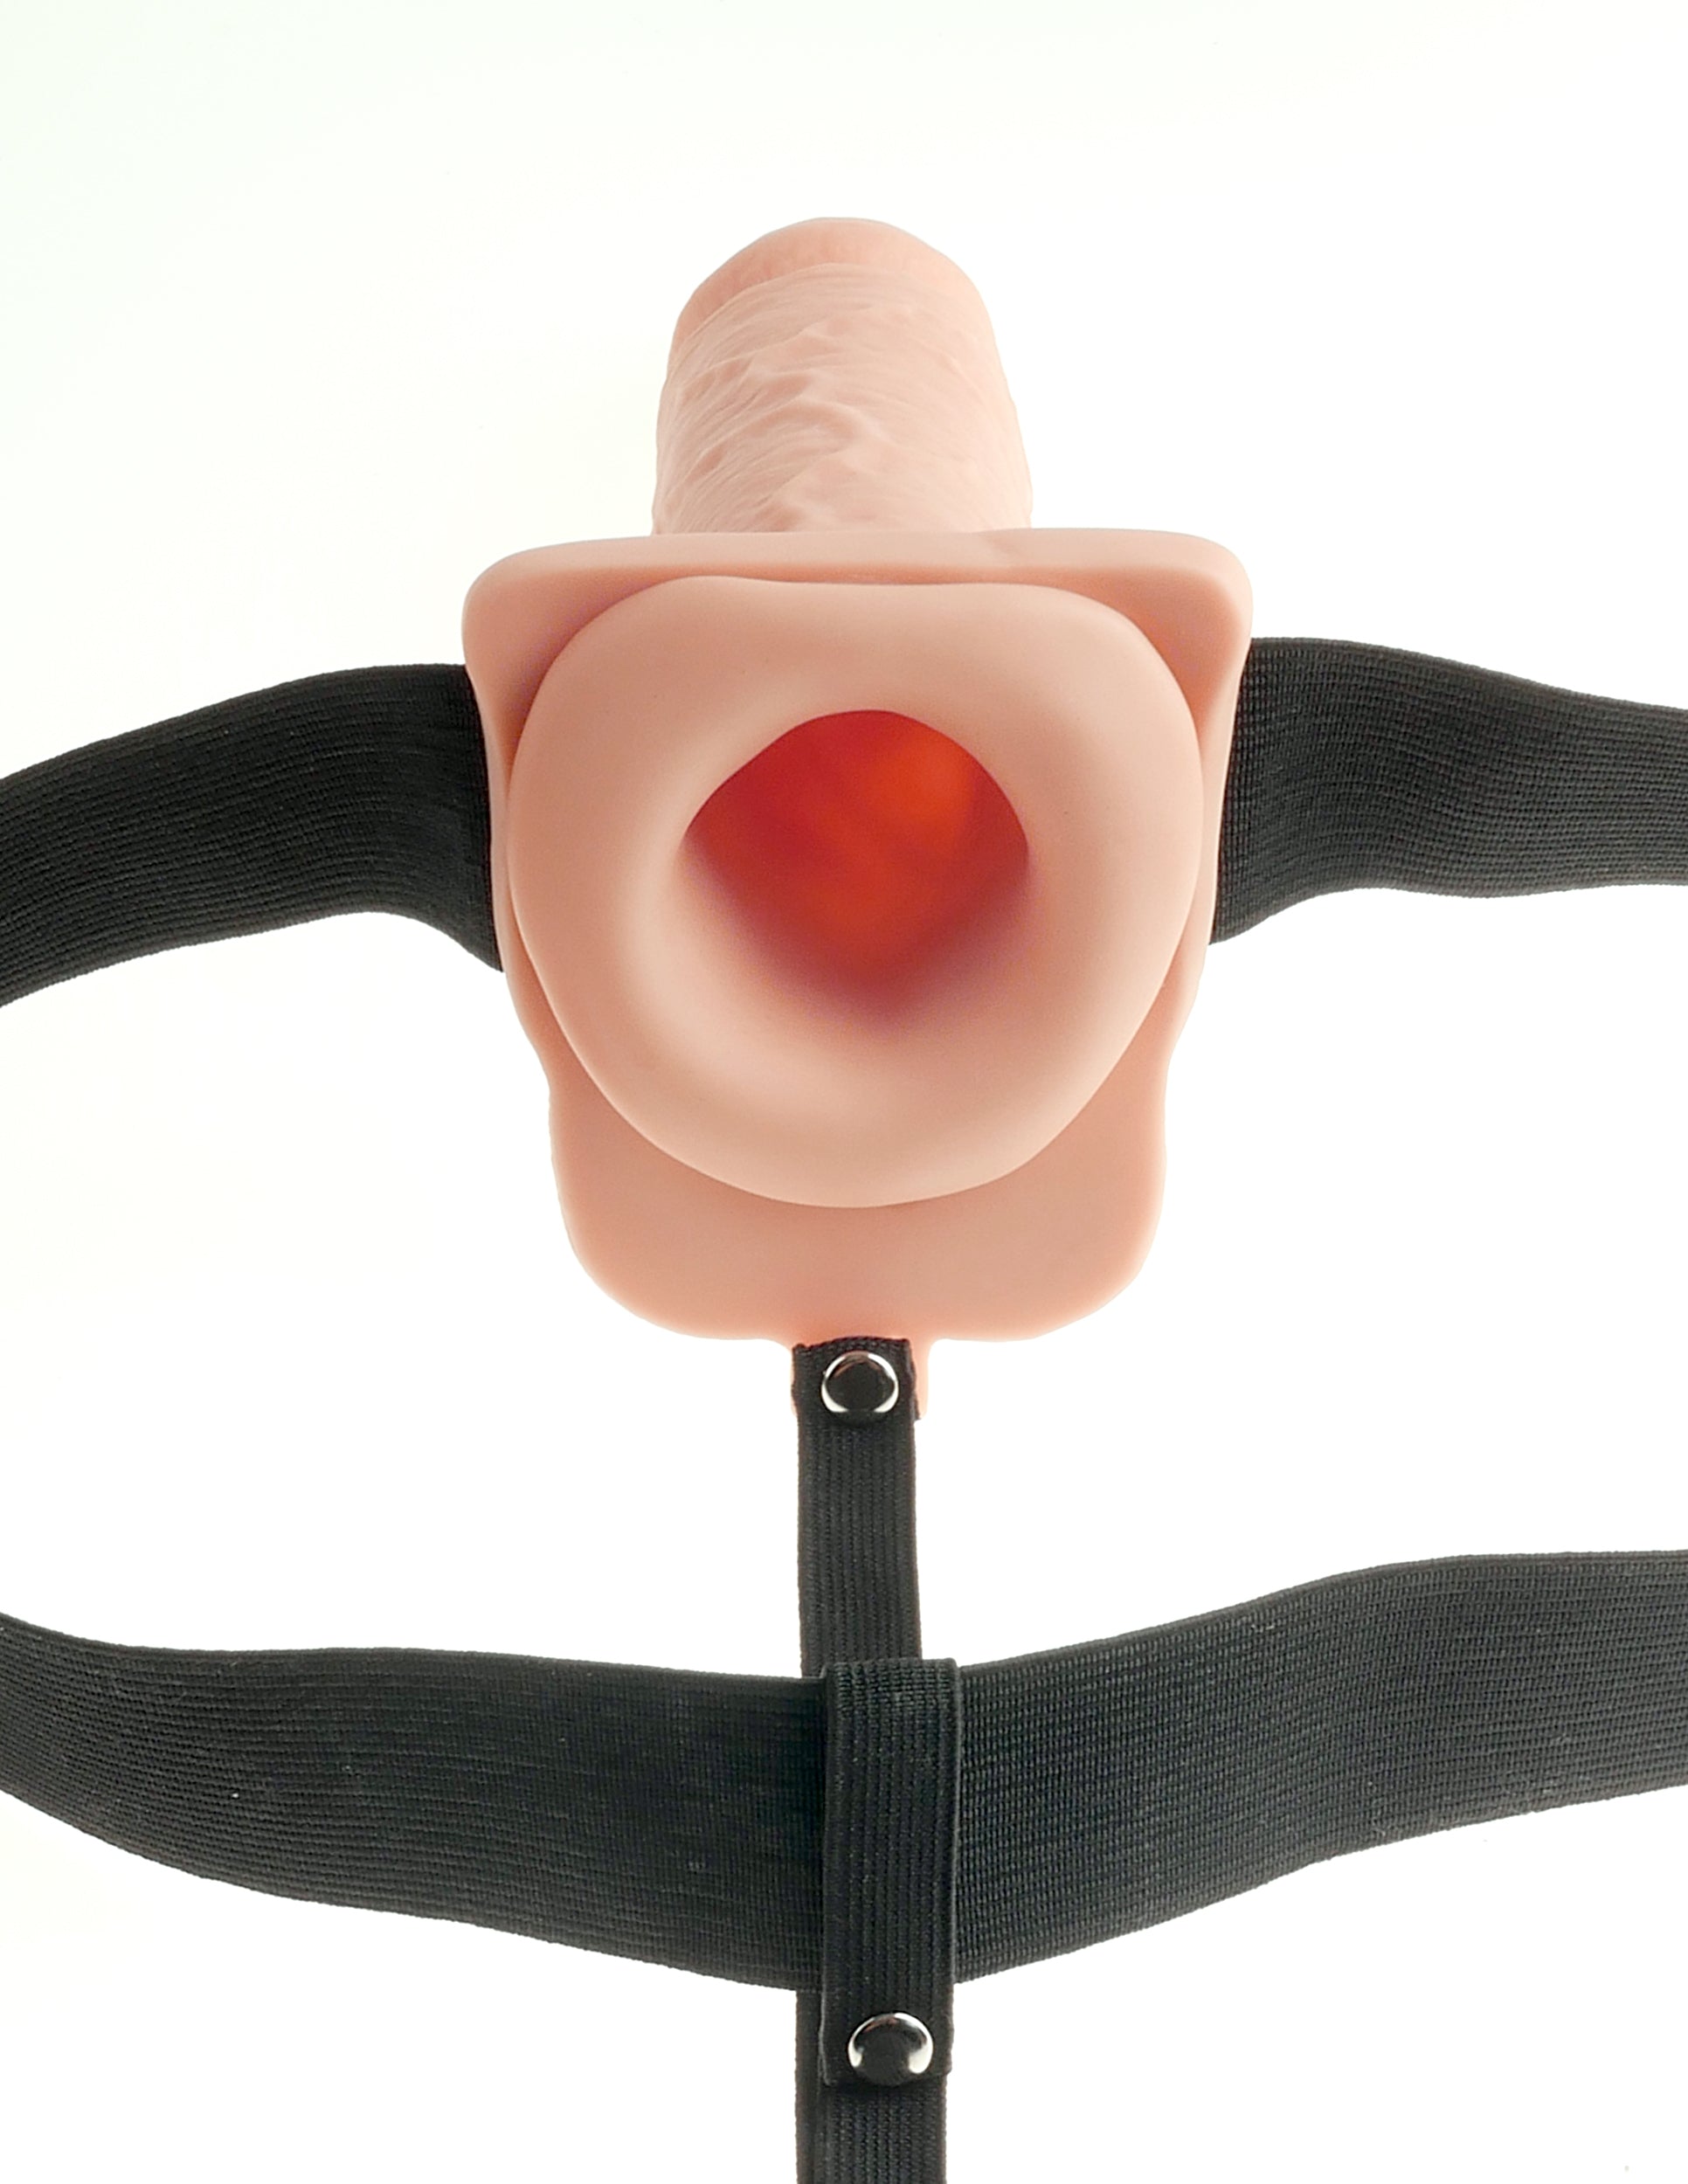 Fetish Fantasy 7 In Hollow Rechargeable Strap-on W- Balls